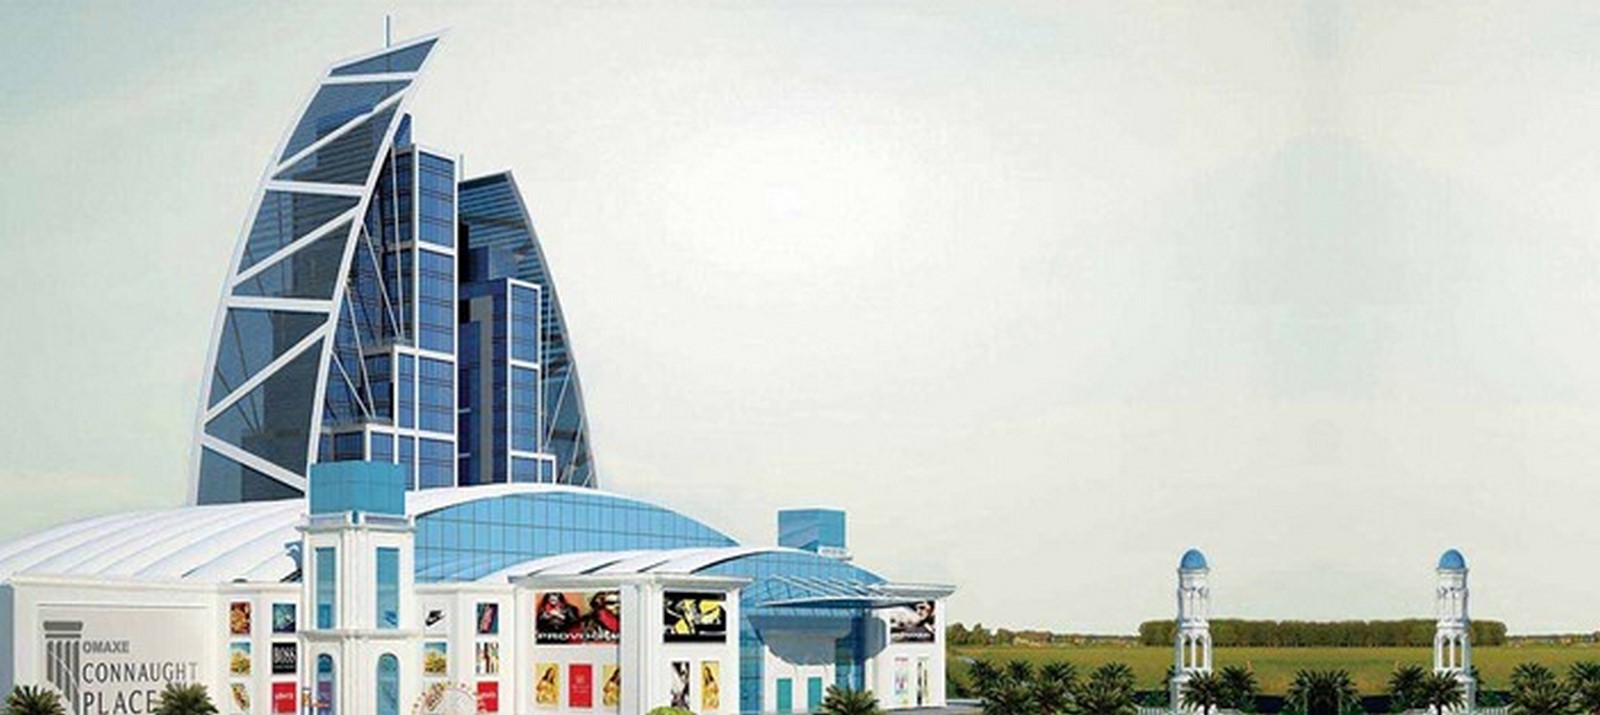 15 Places to Visit in Noida for Travelling Architect - Sheet50